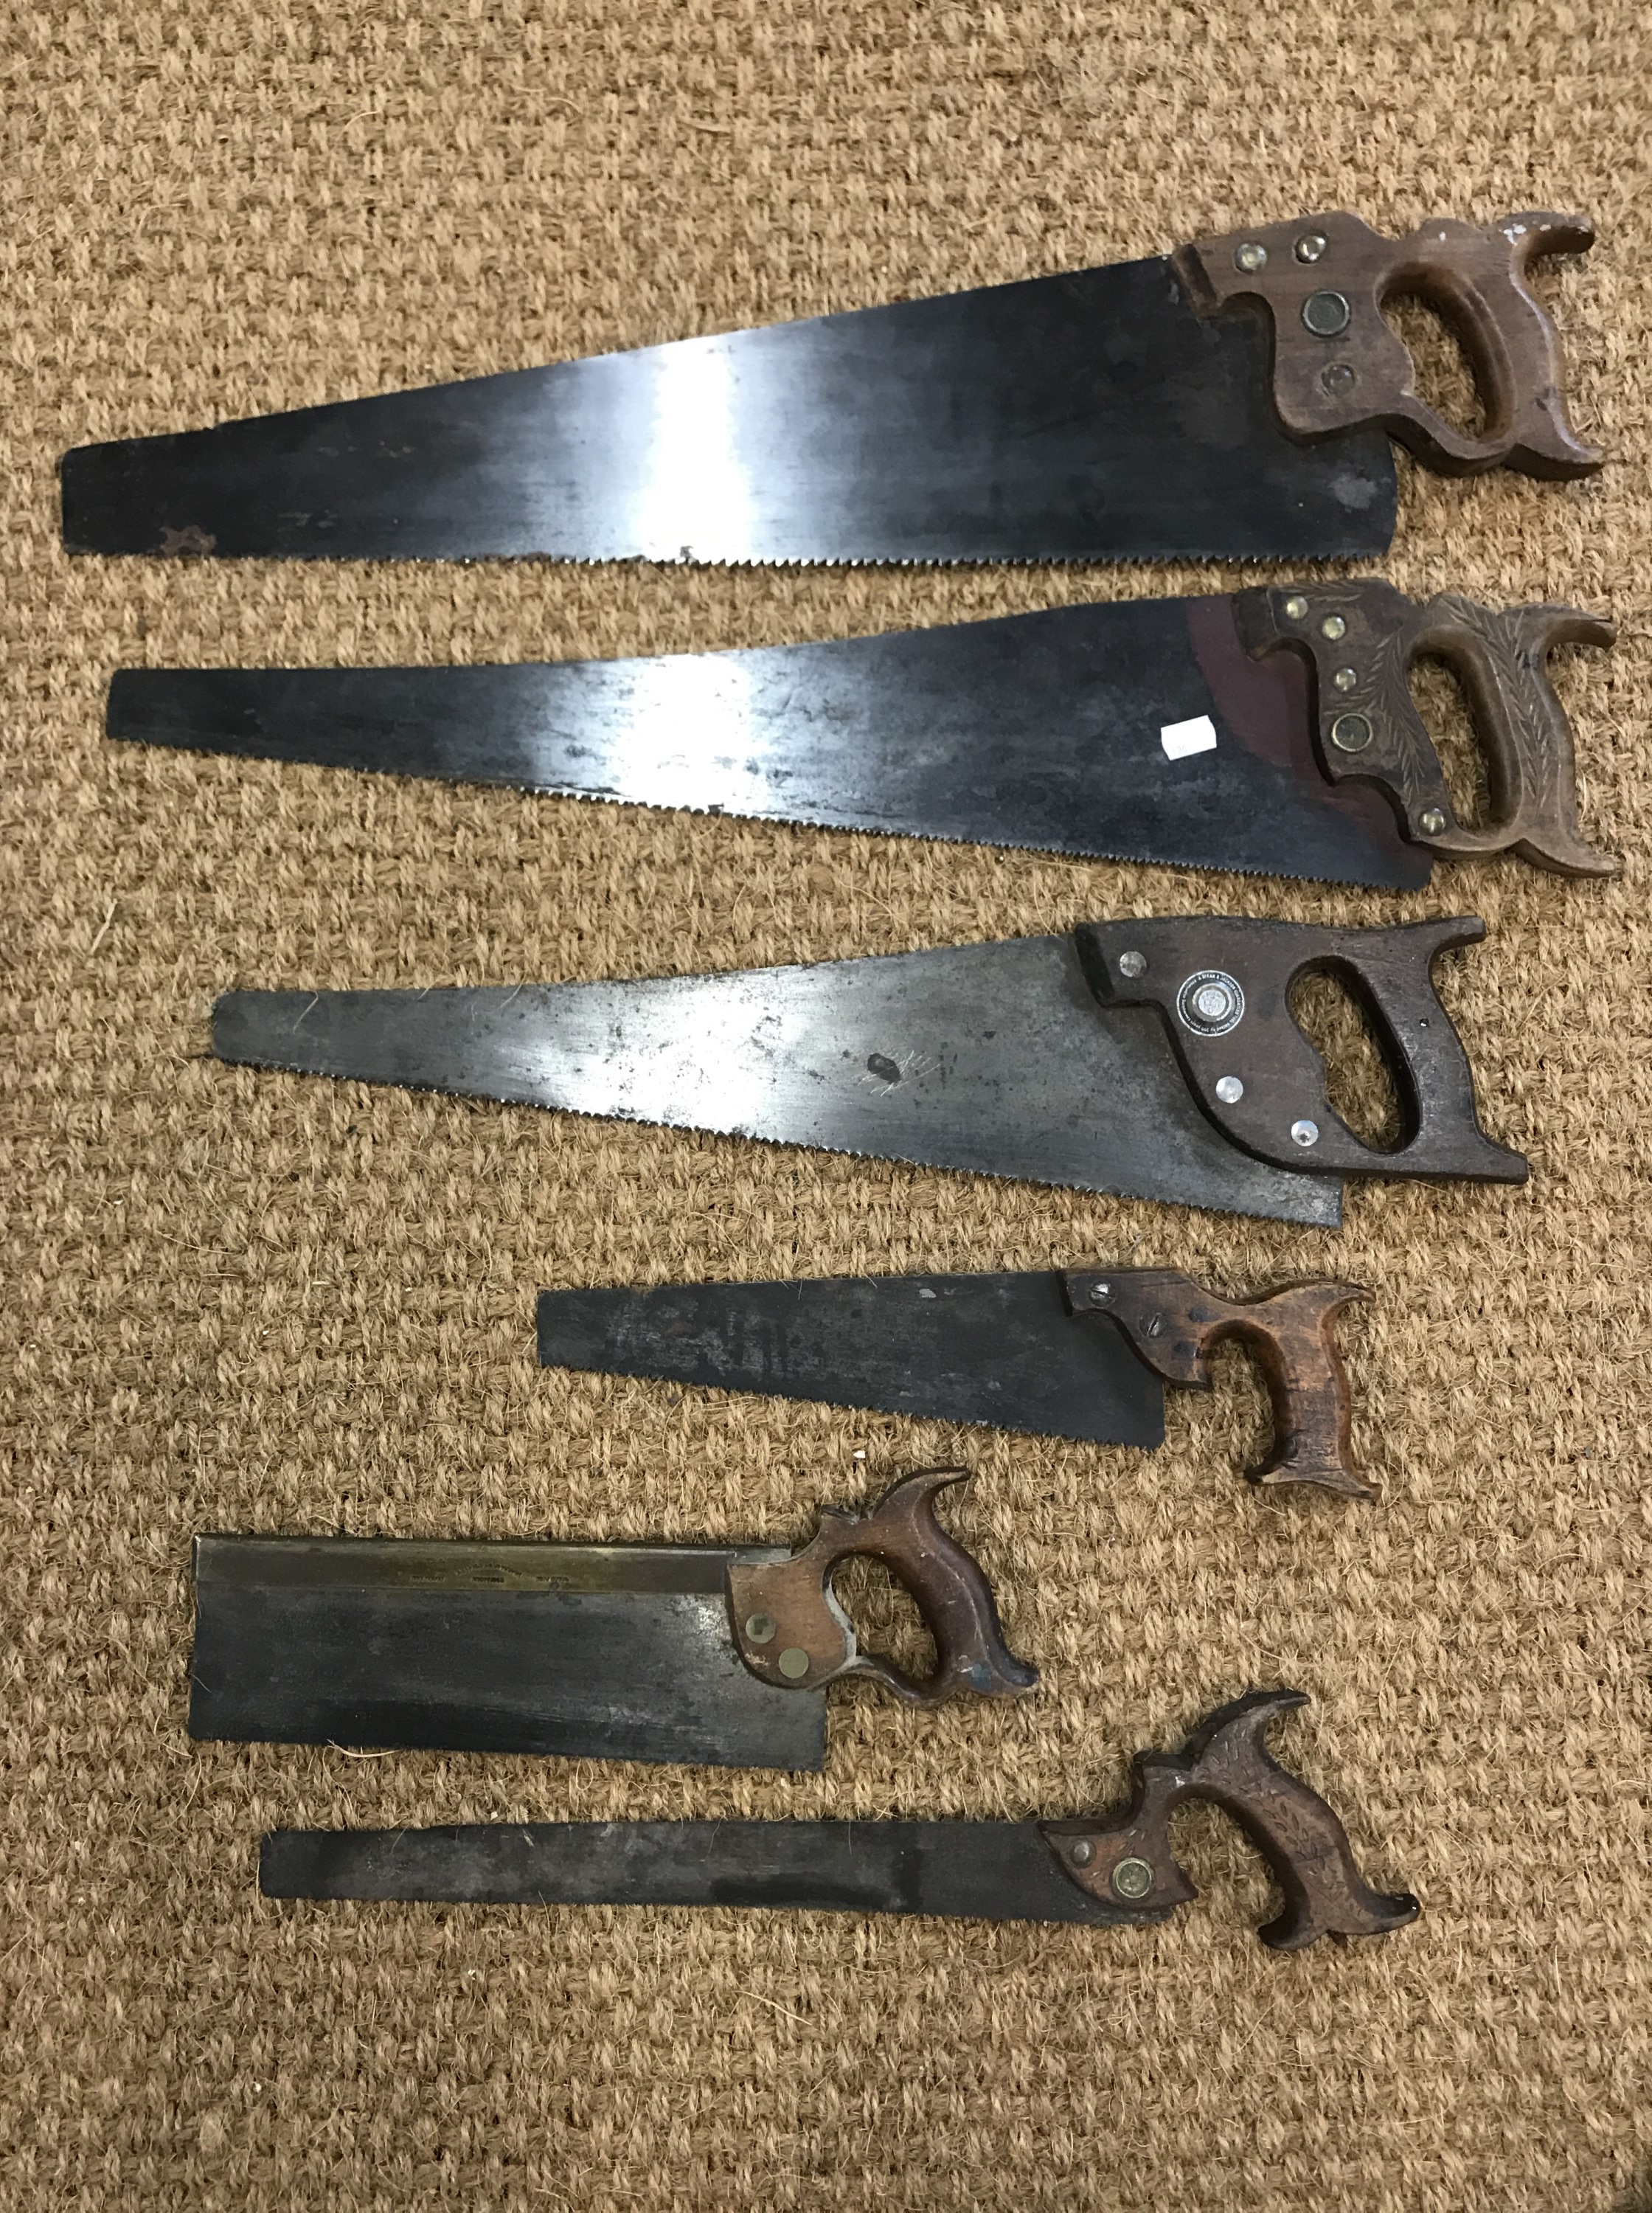 Vintage hand saws manufactured by Disston and Sons of Philadelphia and Spear & Jackson etc.